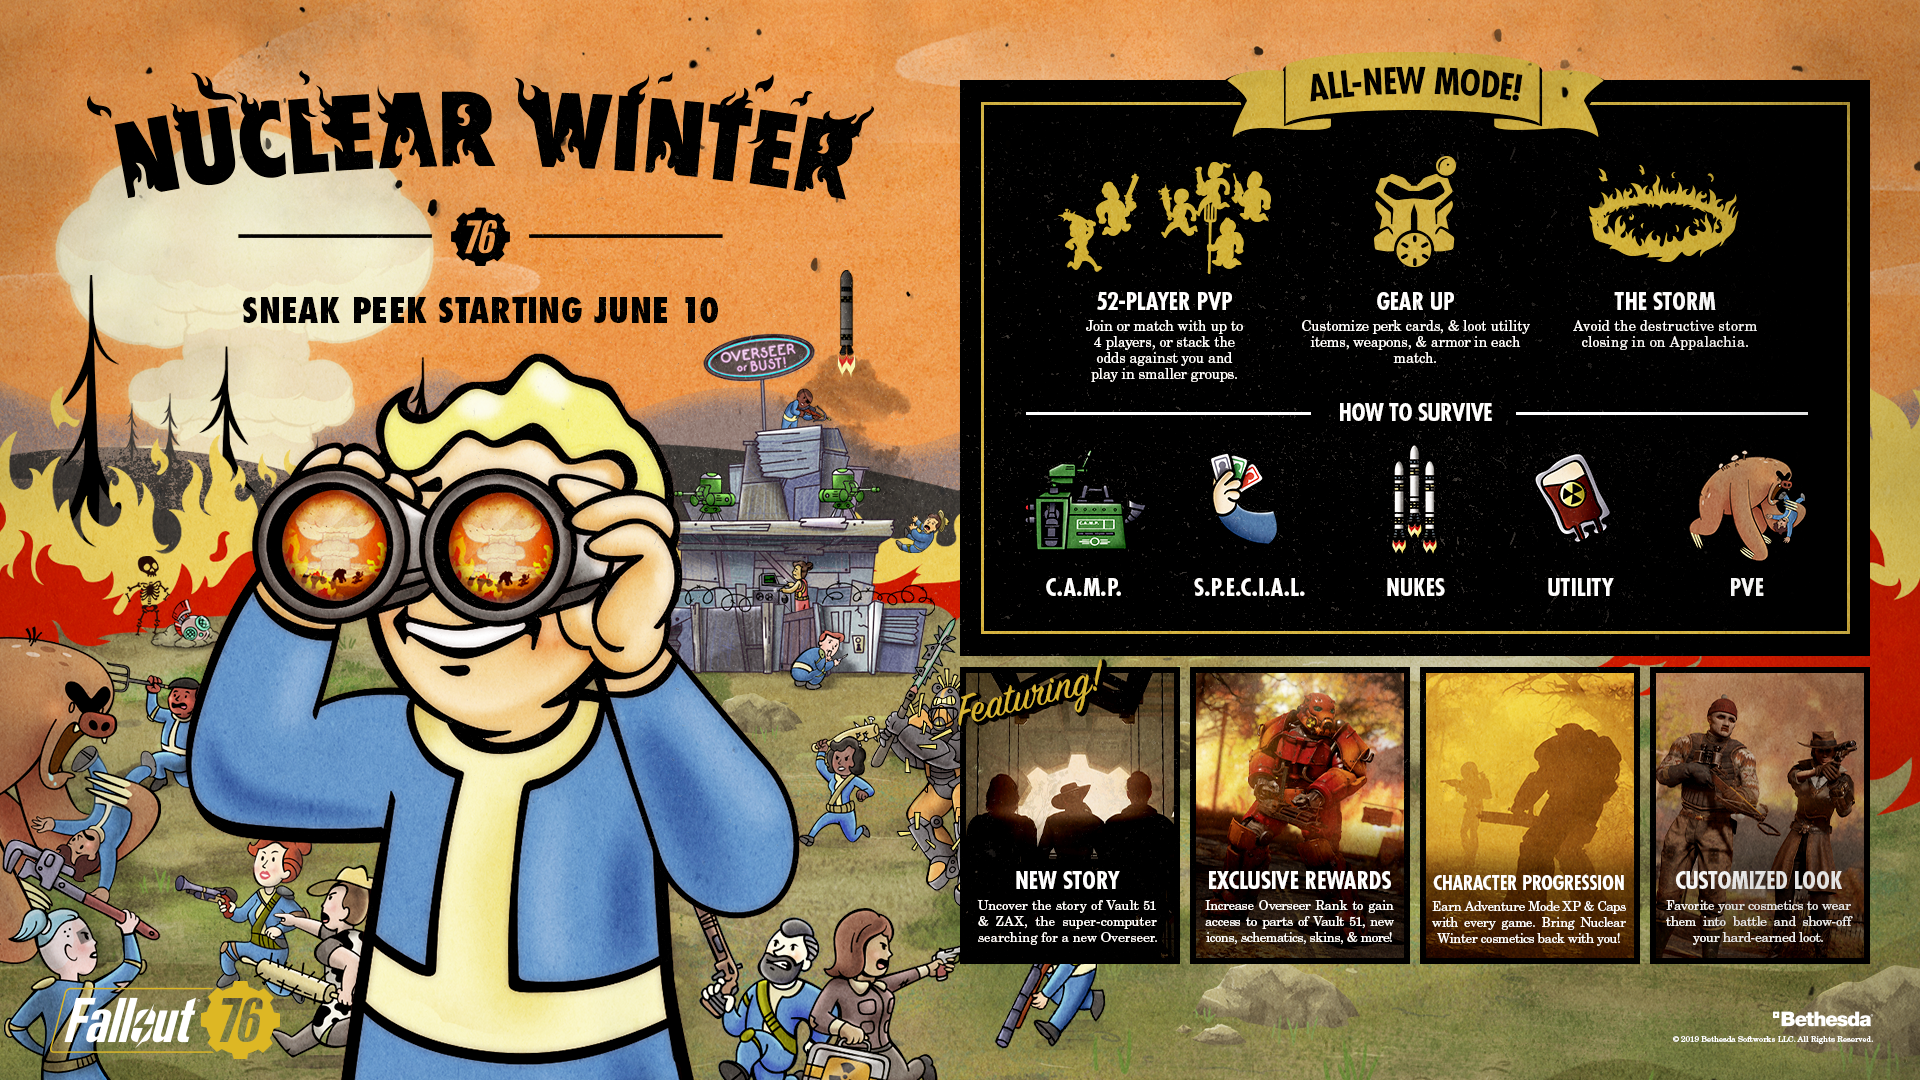 Fallout 76: Nuclear Winter